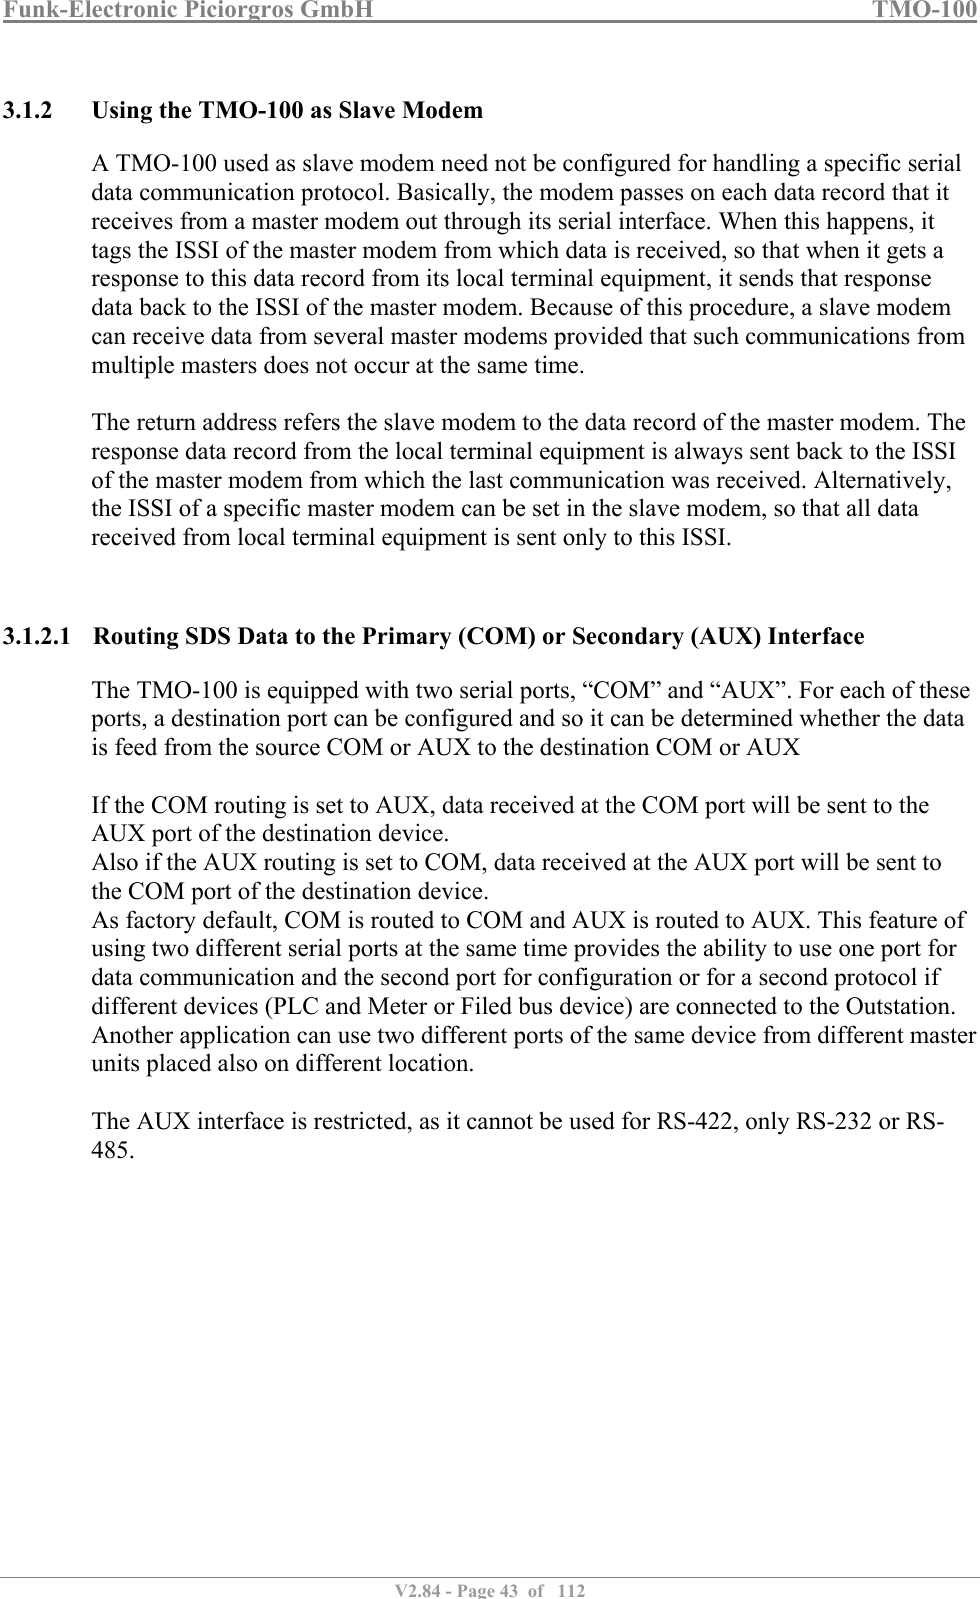 Funk-Electronic Piciorgros GmbH   TMO-100   V2.84 - Page 43  of   112   3.1.2 Using the TMO-100 as Slave Modem A TMO-100 used as slave modem need not be configured for handling a specific serial data communication protocol. Basically, the modem passes on each data record that it receives from a master modem out through its serial interface. When this happens, it tags the ISSI of the master modem from which data is received, so that when it gets a response to this data record from its local terminal equipment, it sends that response data back to the ISSI of the master modem. Because of this procedure, a slave modem can receive data from several master modems provided that such communications from multiple masters does not occur at the same time.   The return address refers the slave modem to the data record of the master modem. The response data record from the local terminal equipment is always sent back to the ISSI of the master modem from which the last communication was received. Alternatively, the ISSI of a specific master modem can be set in the slave modem, so that all data received from local terminal equipment is sent only to this ISSI.    3.1.2.1 Routing SDS Data to the Primary (COM) or Secondary (AUX) Interface The TMO-100 is equipped with two serial ports, “COM” and “AUX”. For each of these ports, a destination port can be configured and so it can be determined whether the data is feed from the source COM or AUX to the destination COM or AUX   If the COM routing is set to AUX, data received at the COM port will be sent to the AUX port of the destination device. Also if the AUX routing is set to COM, data received at the AUX port will be sent to the COM port of the destination device. As factory default, COM is routed to COM and AUX is routed to AUX. This feature of using two different serial ports at the same time provides the ability to use one port for data communication and the second port for configuration or for a second protocol if different devices (PLC and Meter or Filed bus device) are connected to the Outstation. Another application can use two different ports of the same device from different master units placed also on different location.  The AUX interface is restricted, as it cannot be used for RS-422, only RS-232 or RS-485.   